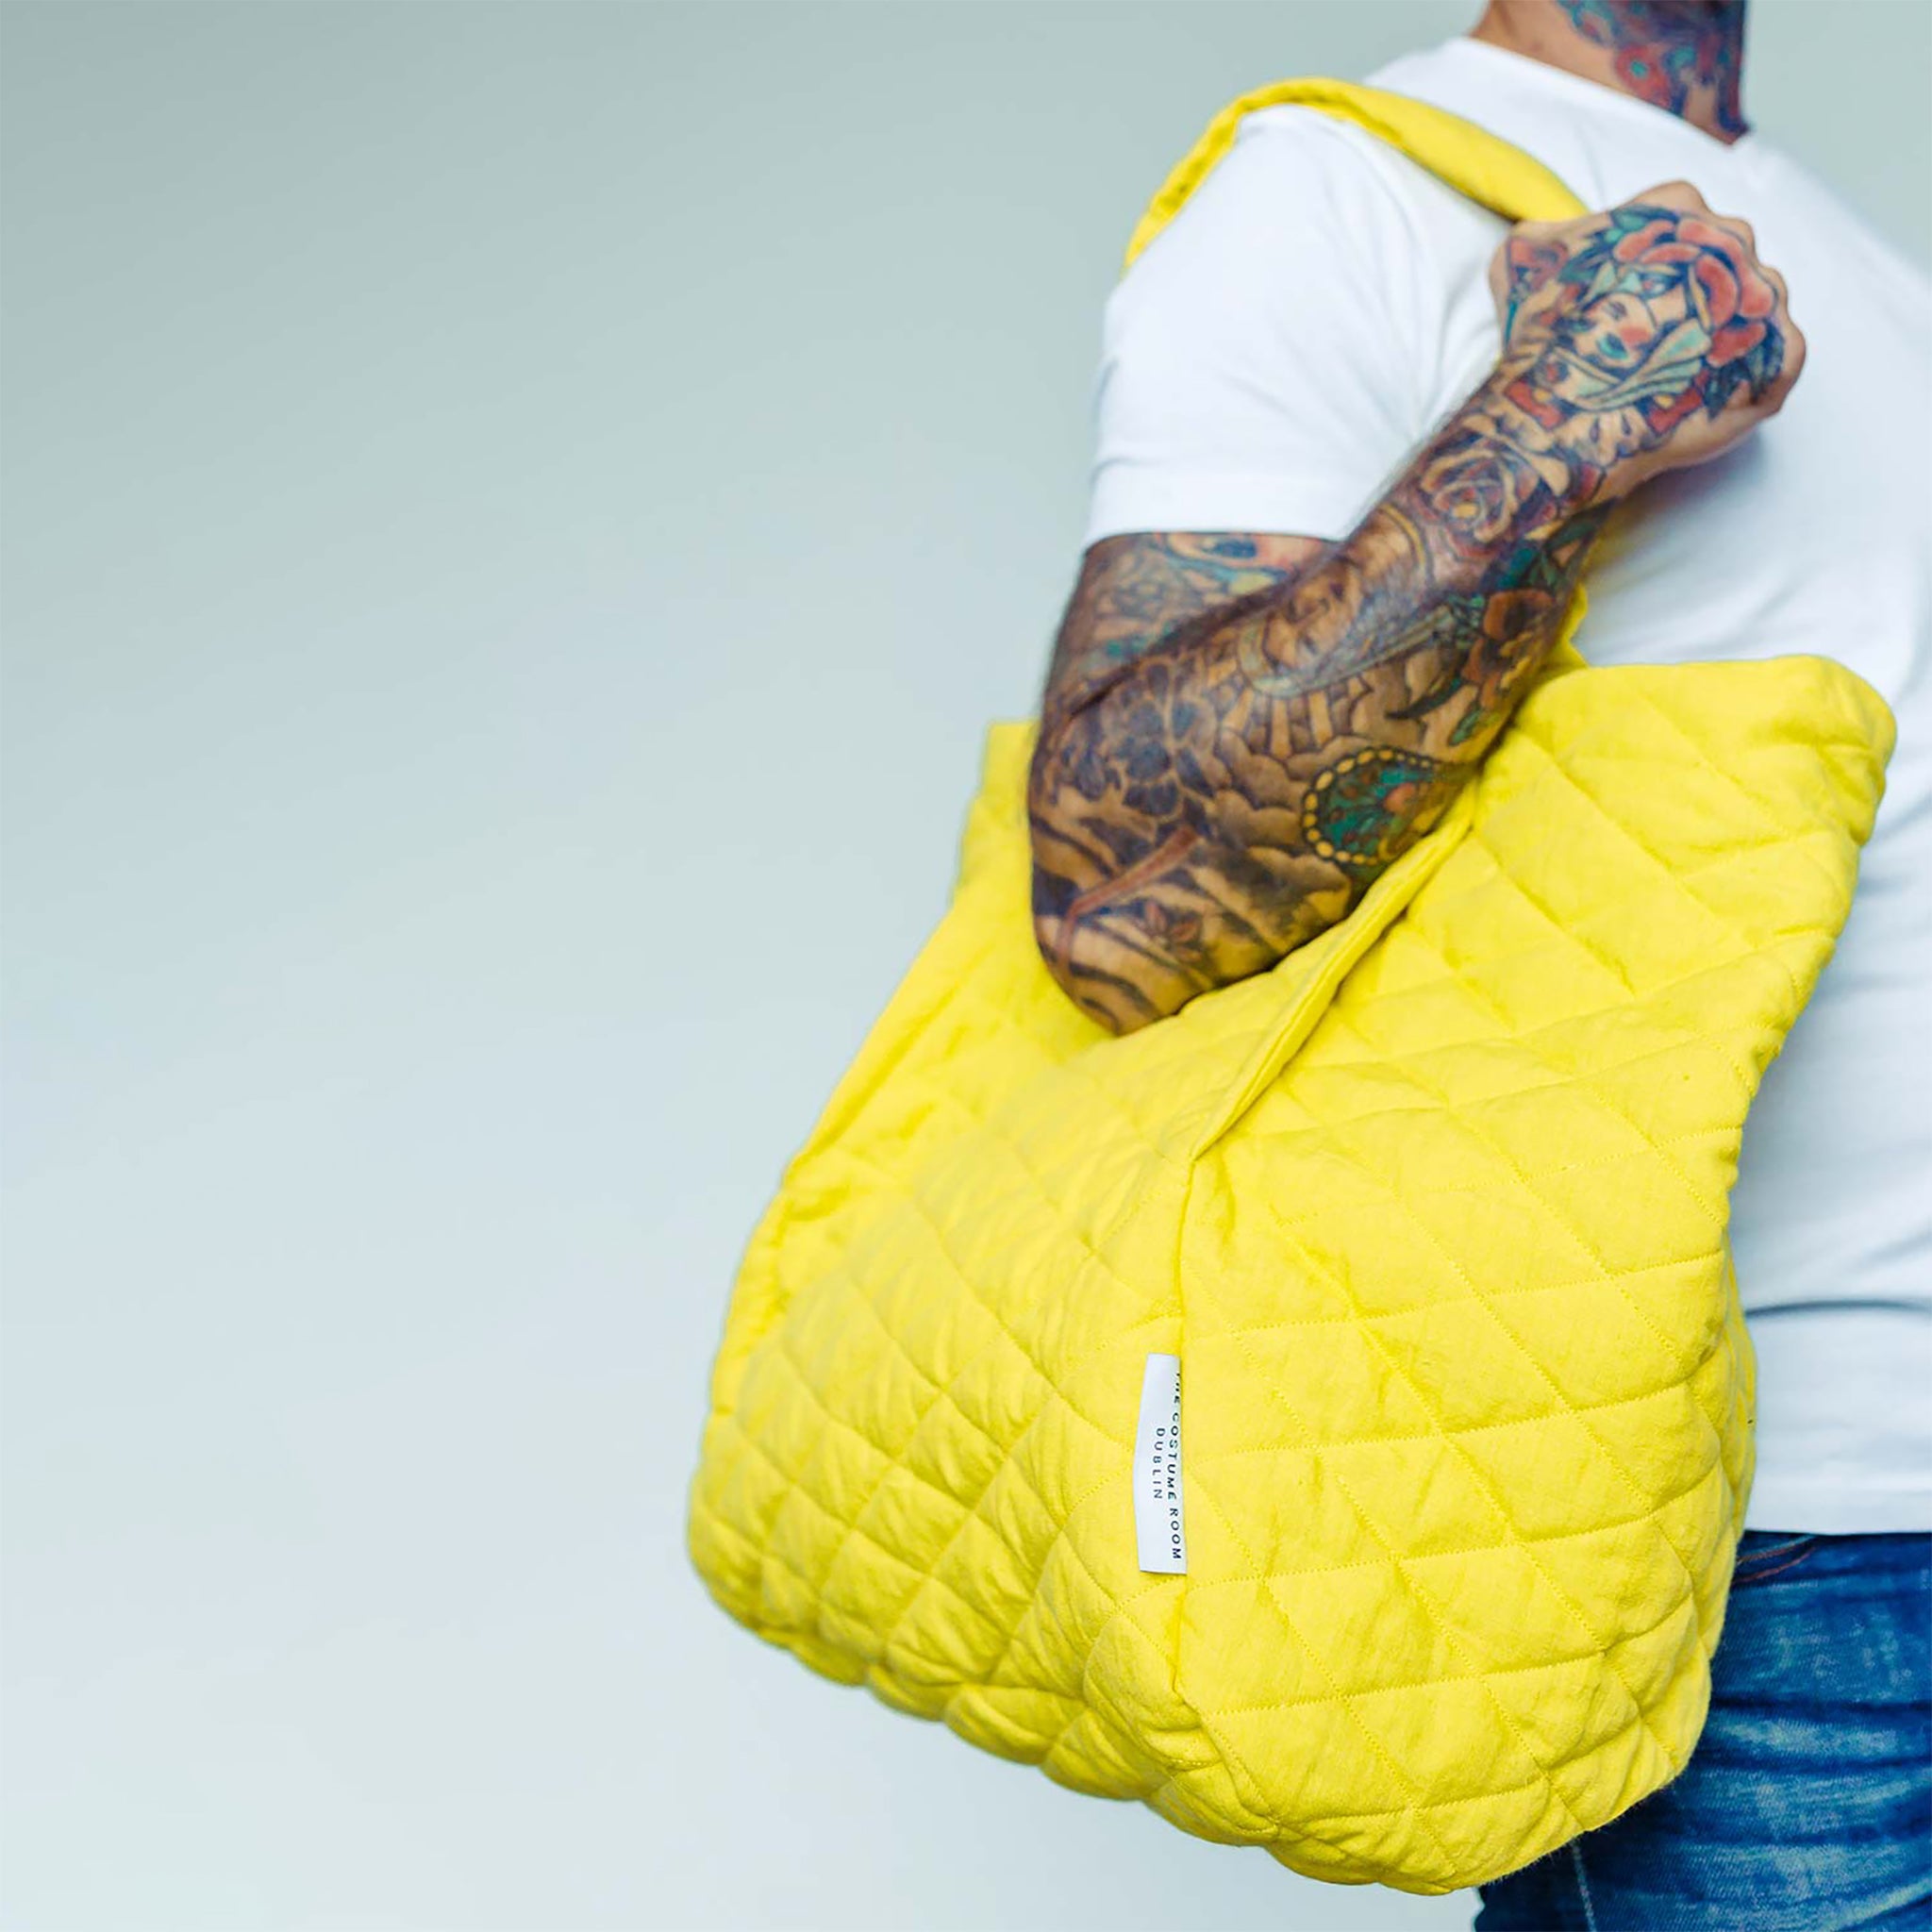 Tattooed Man wearing The Costume Room sunshine yellow Irish Linen Quilted Bag on his shoulder